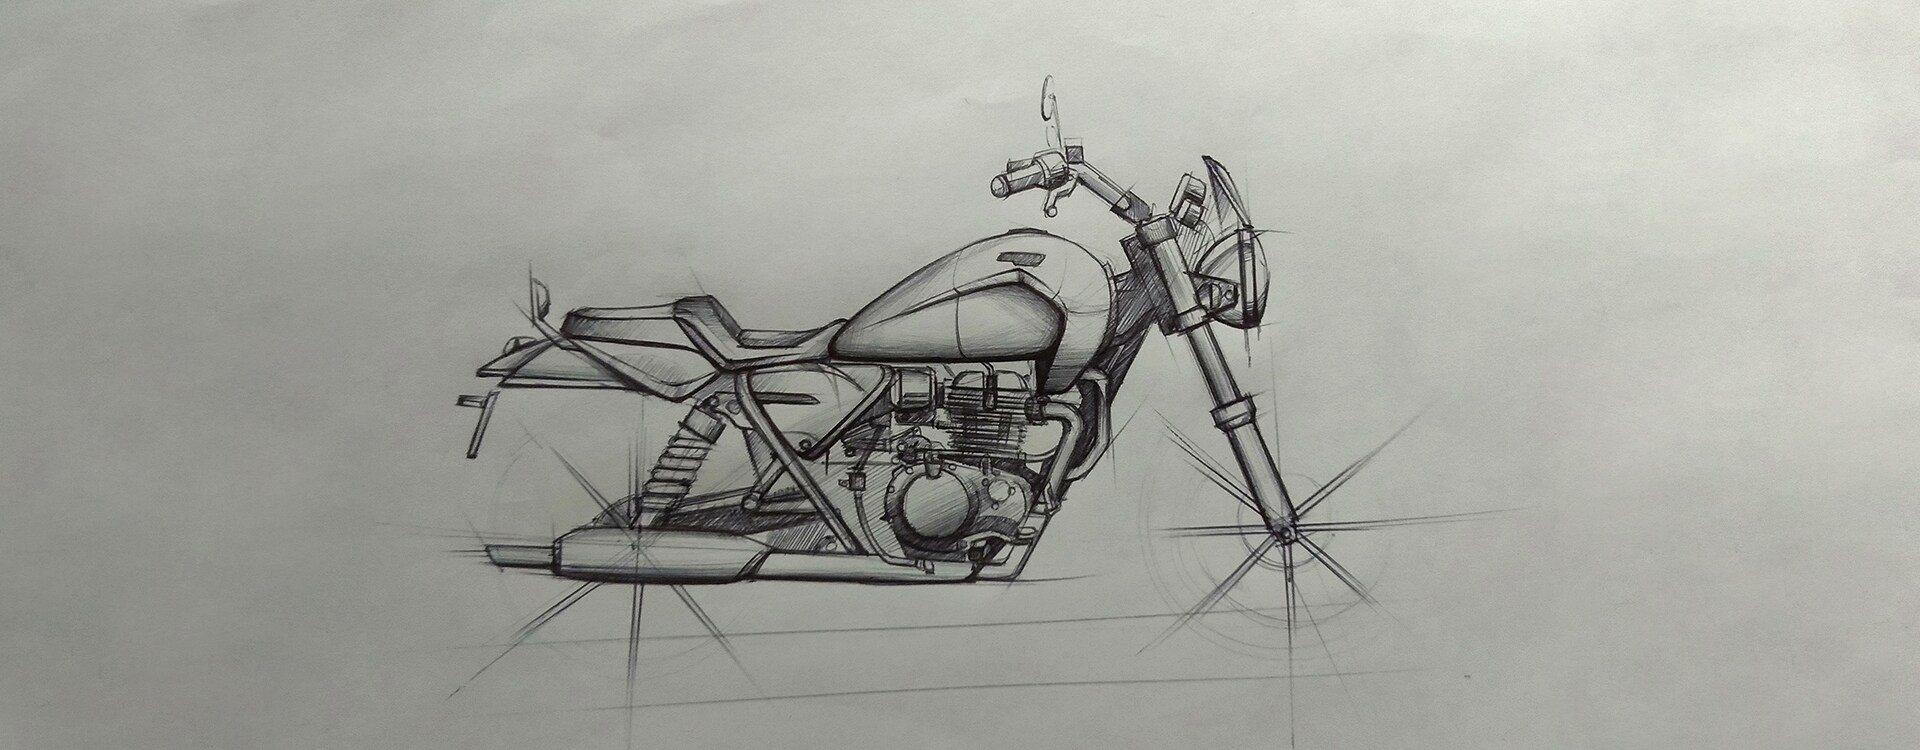 Royal Enfield Classic 500, Art Sketch Poster [without frame] | eBay